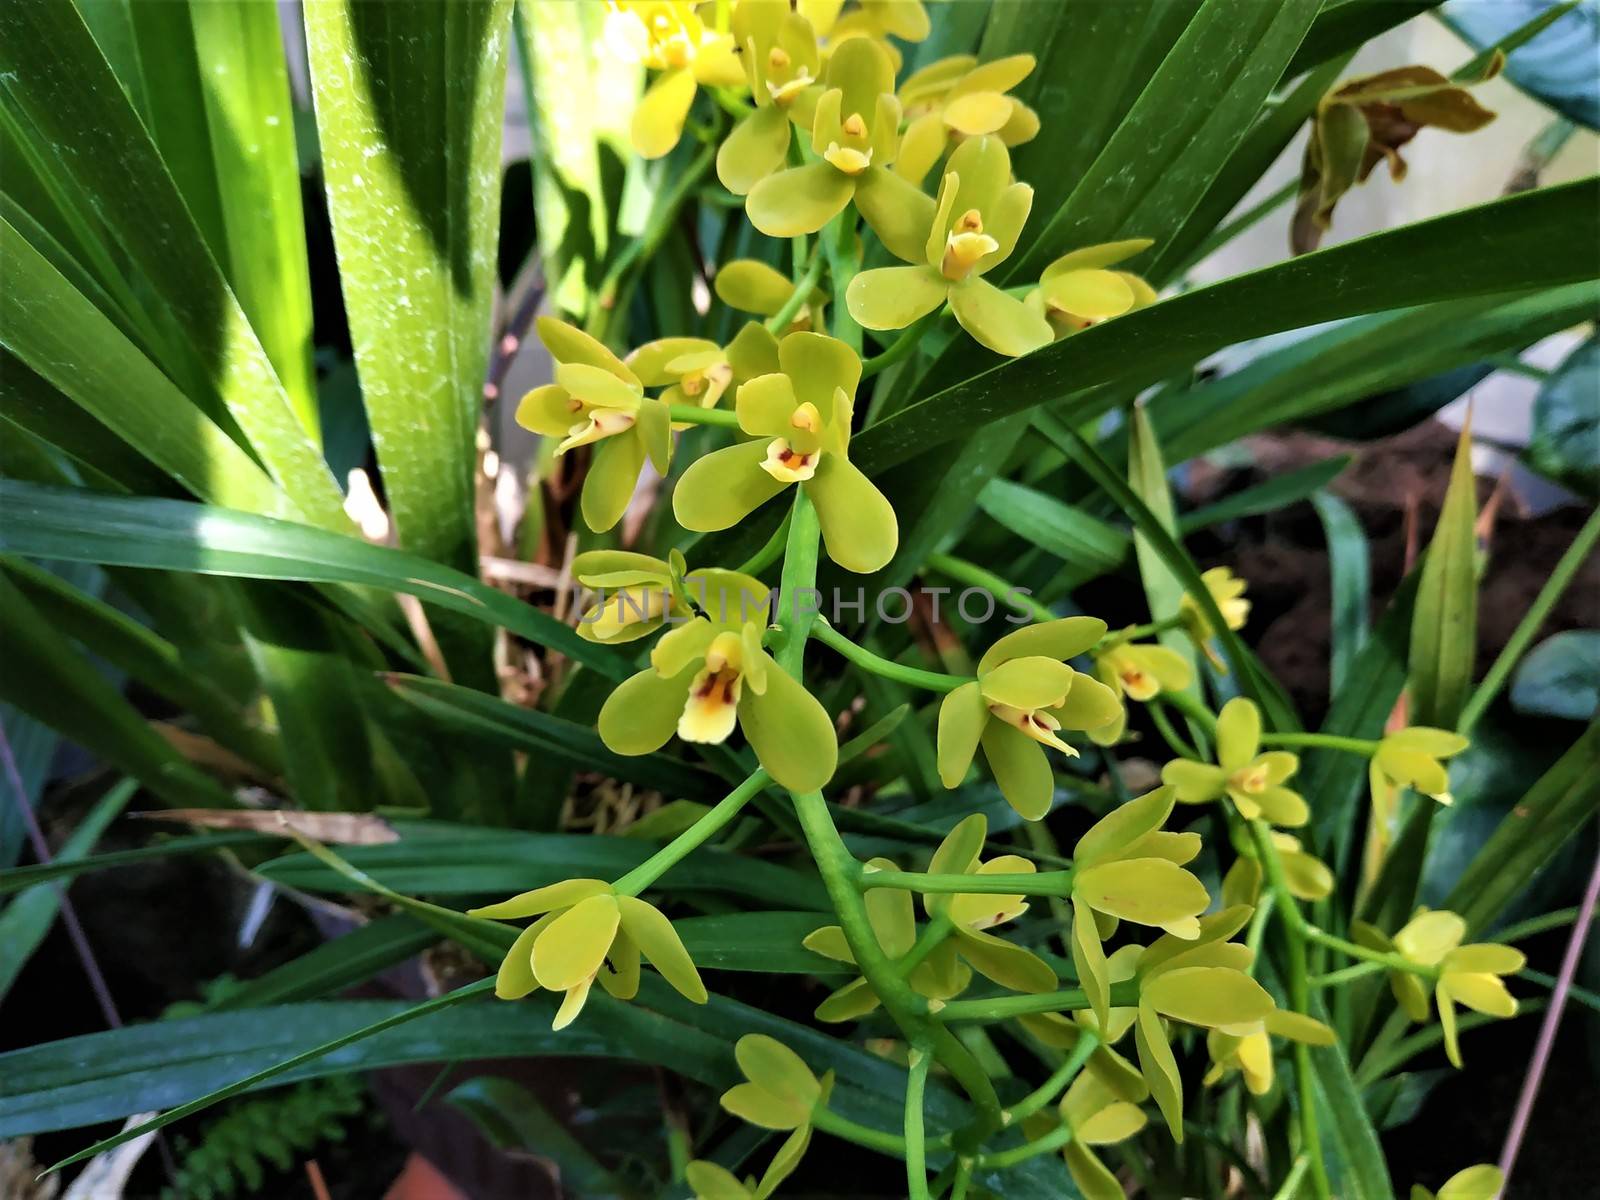 Nice Cymbidium orchid with small yellow-greenish blossoms by pisces2386